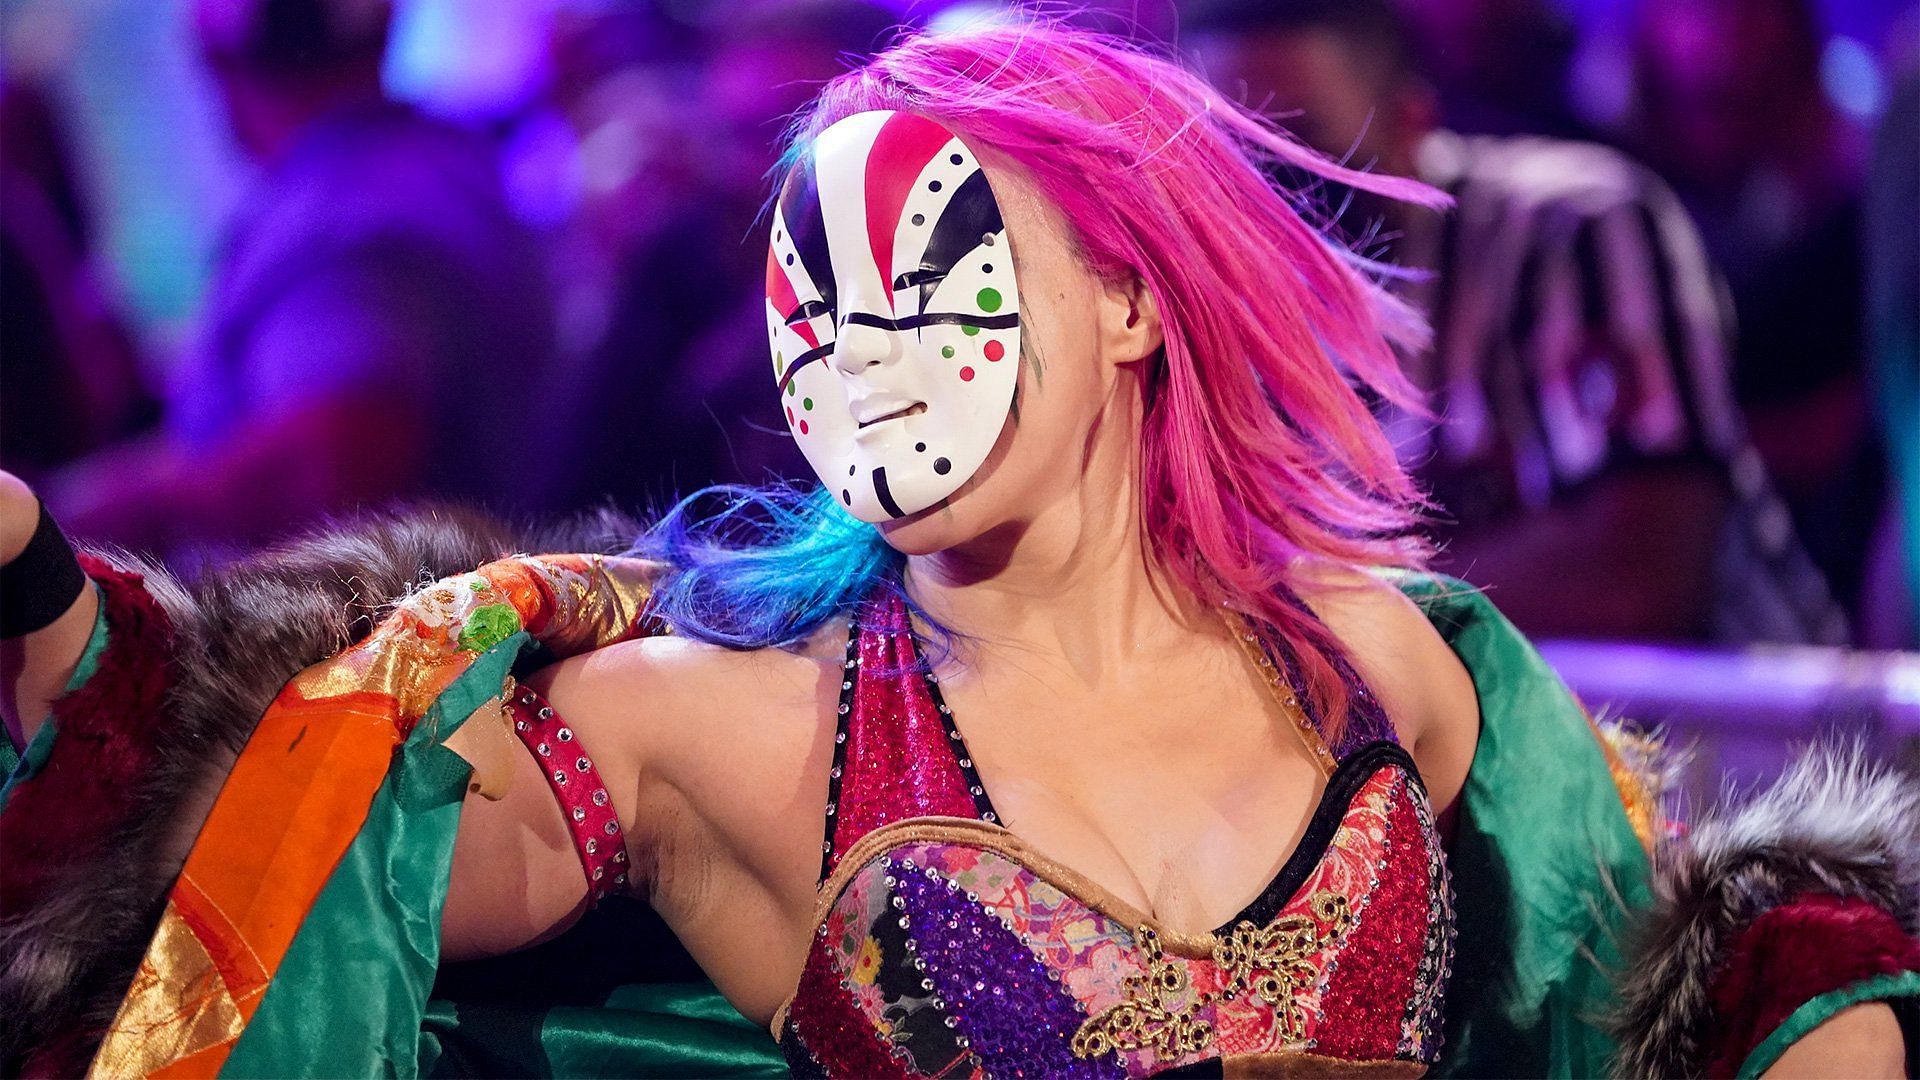 Asuka has recently teamed up with Alexa Bliss